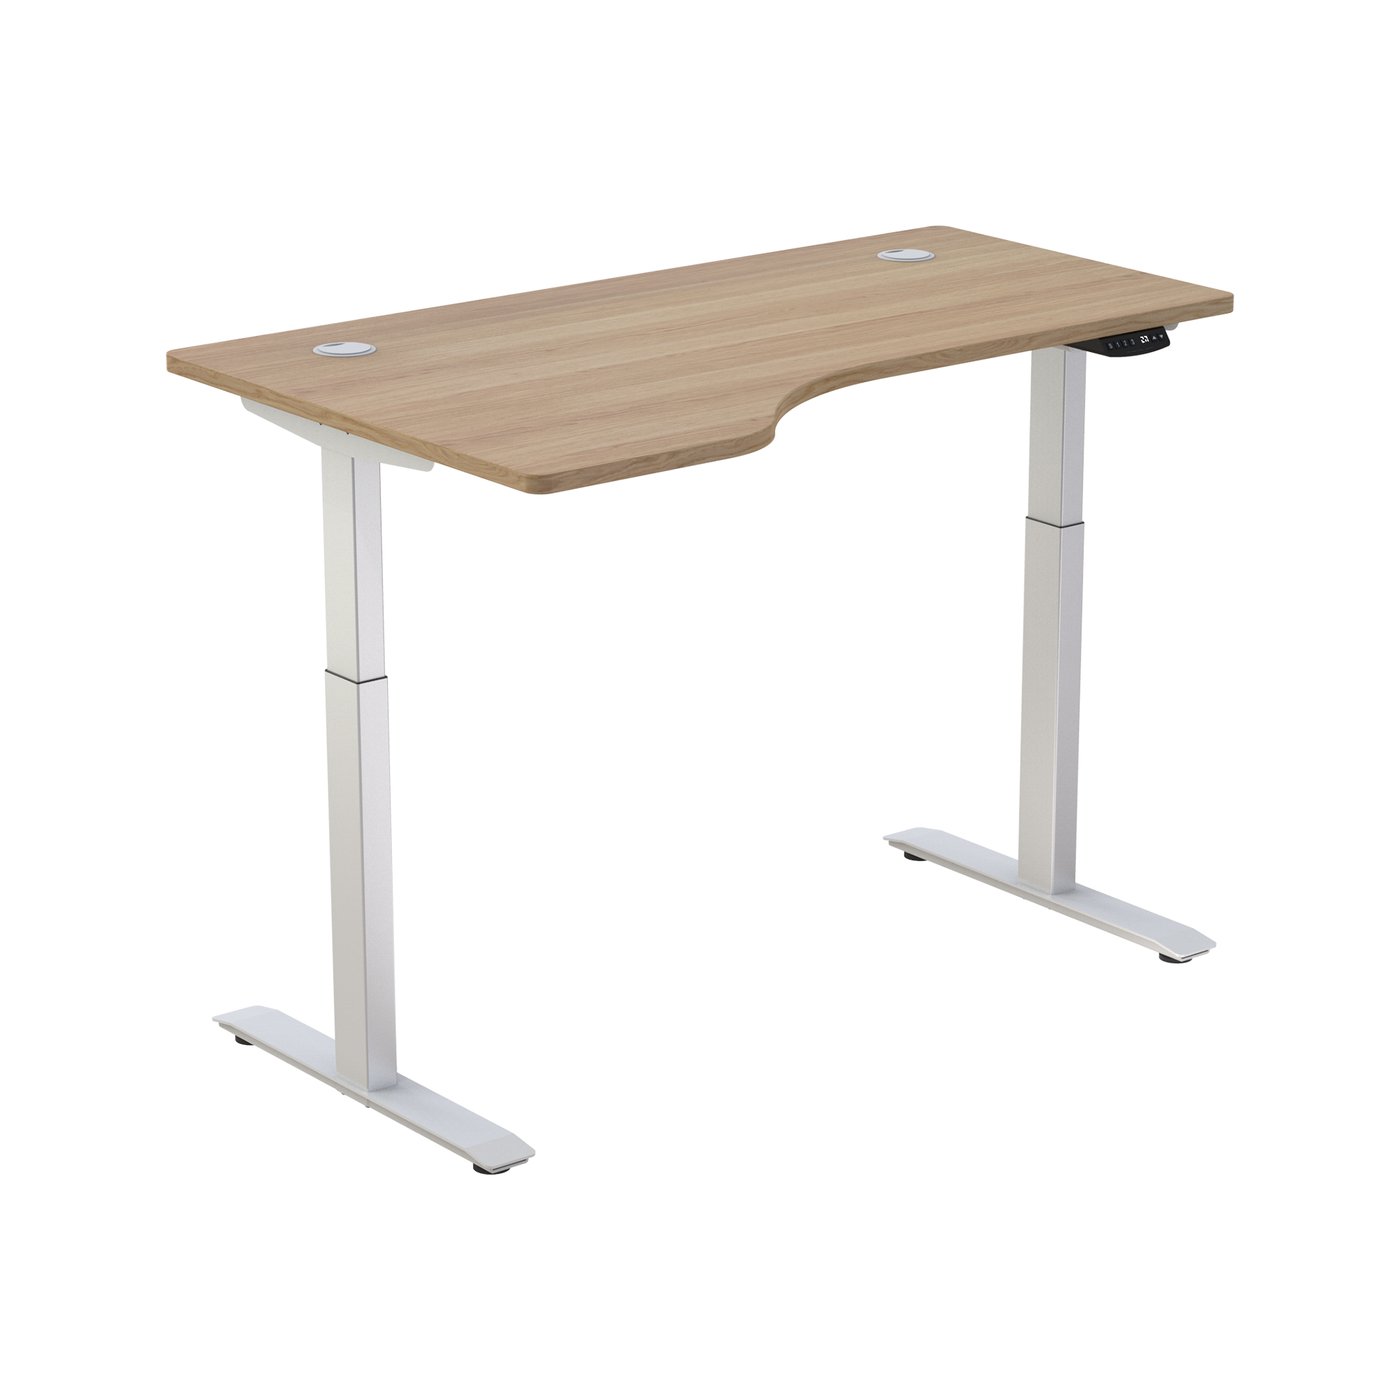 Bella Electric Height Adjustable Standing Desk with ergonomic contoured Tabletop (71"x 31.5" / 180 x 80cm) and dual motor lift system for Home Office Workstation